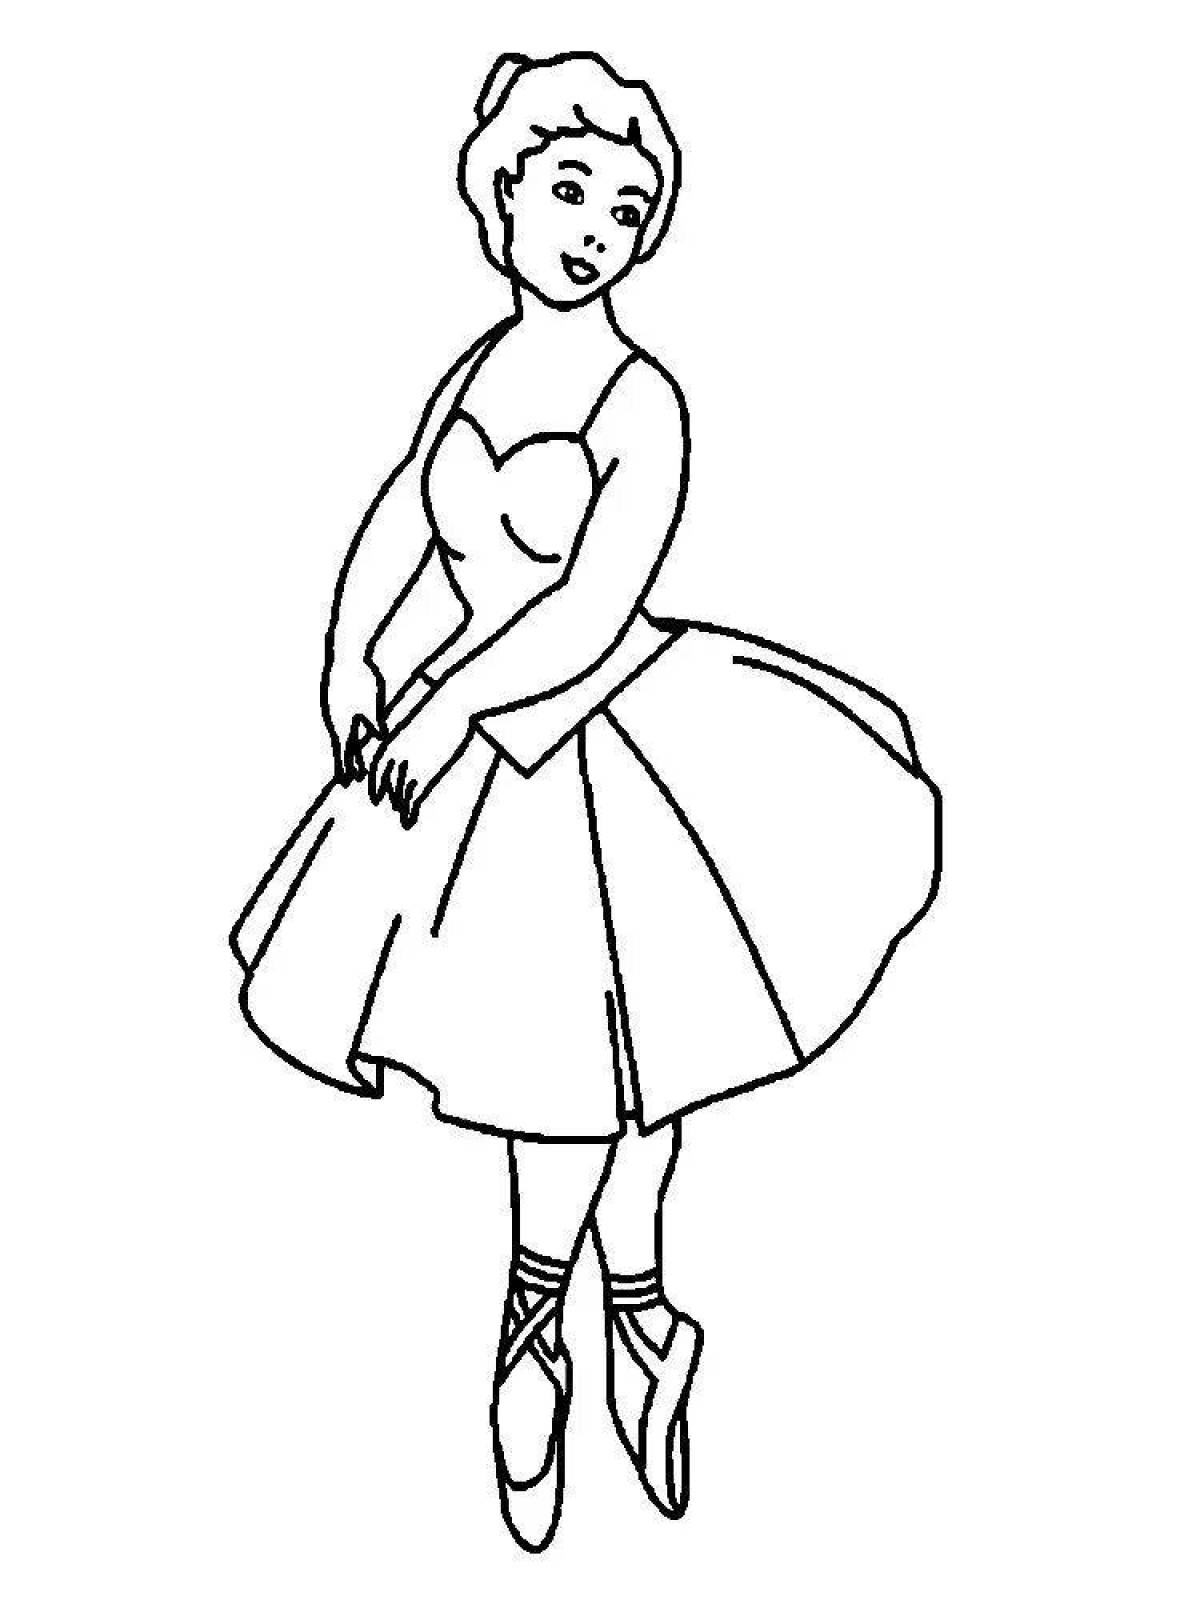 Animated people coloring pages for kids